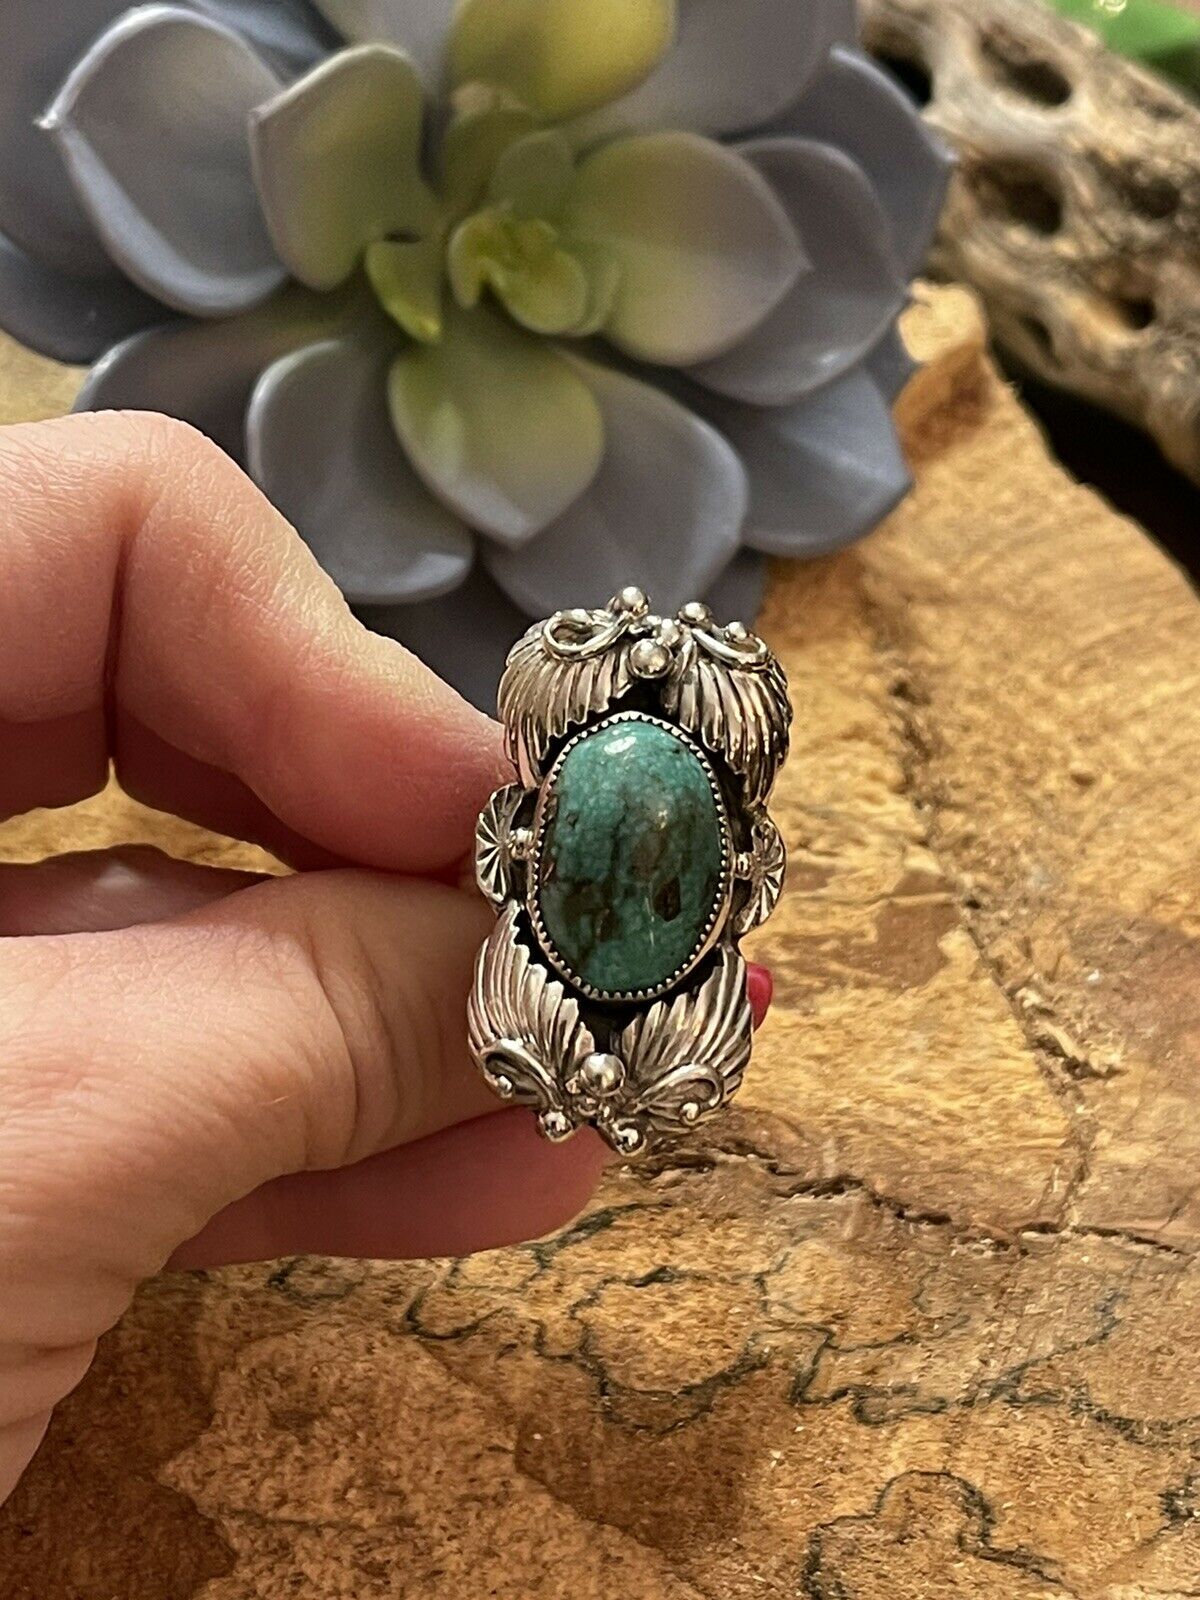 Navajo Southwest Styling Turquoise & Sterling Silver Statement Ring Size 9.5